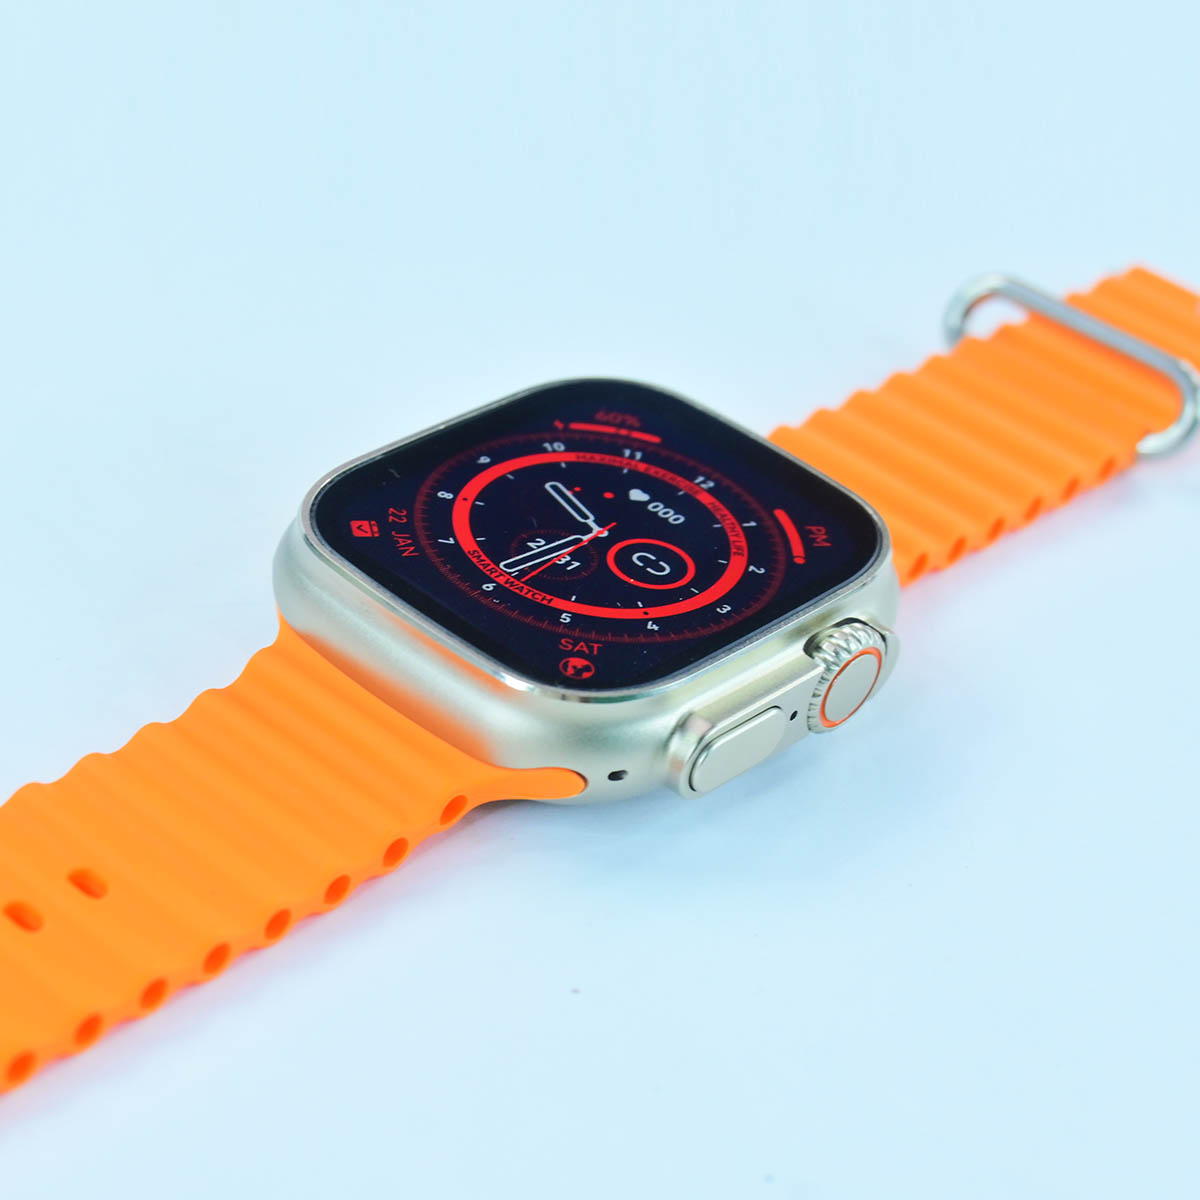 Original Zordai Z8 Ultra Max Smart Watch with Forver ON Display